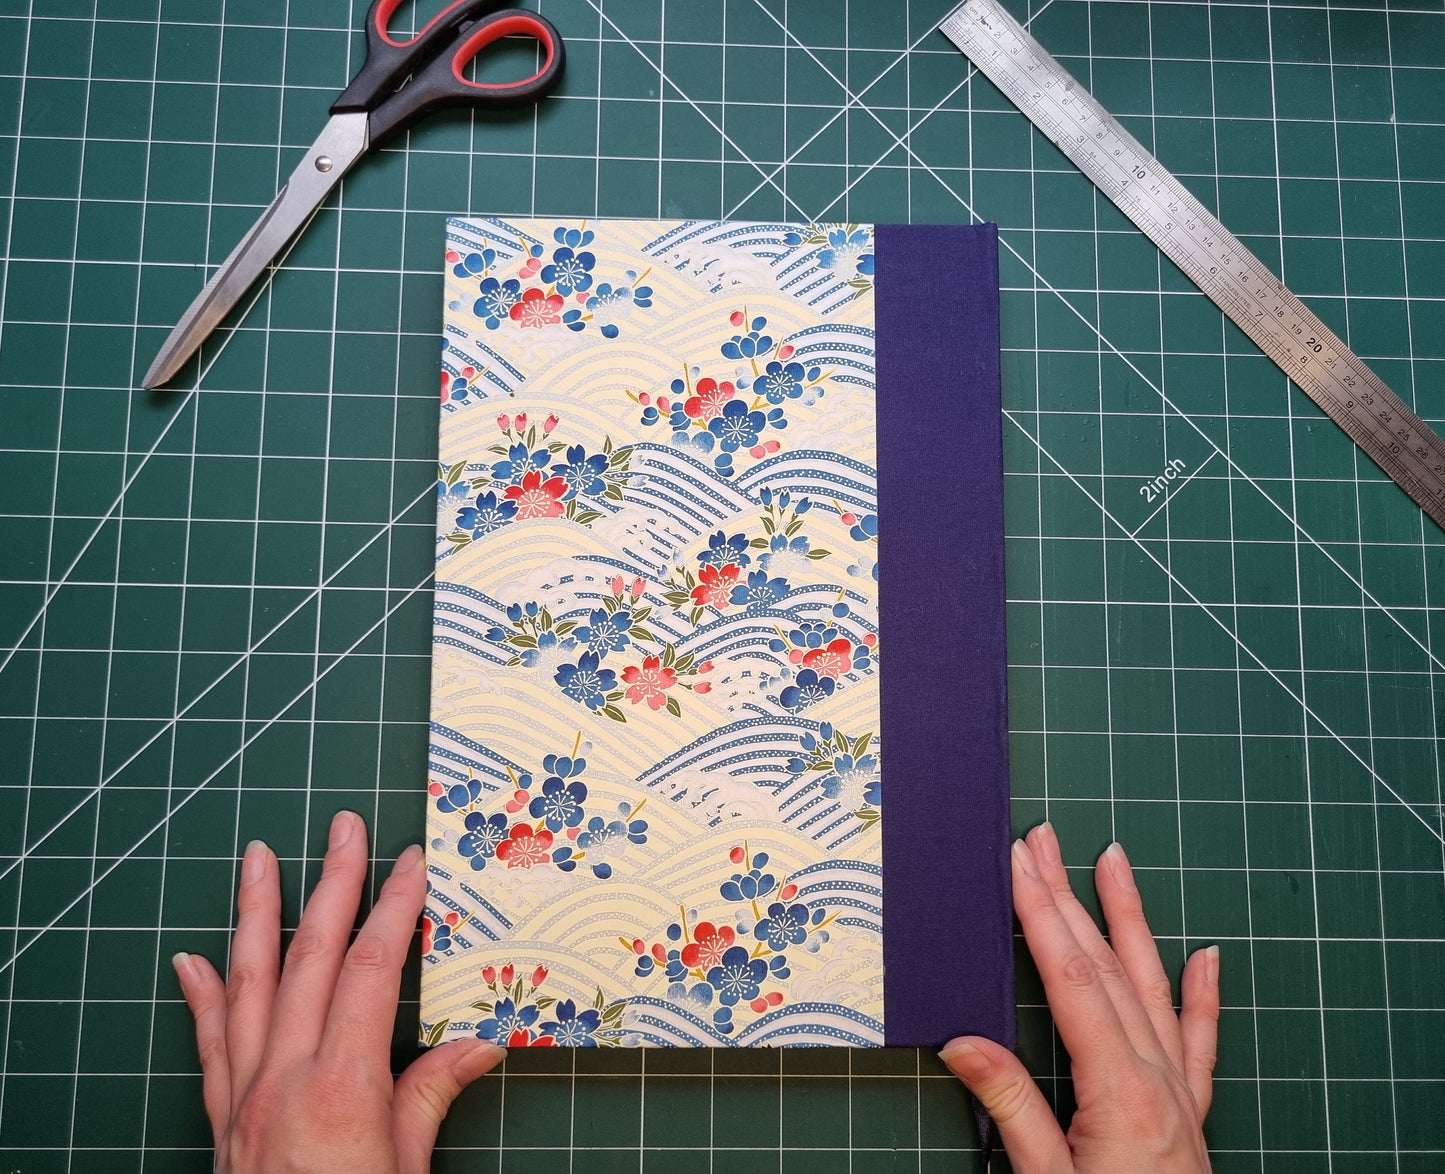 Handmade A4 Sketchbook | 120gsm Paper | Chiyogami Waves Design with Ribbon Bookmark